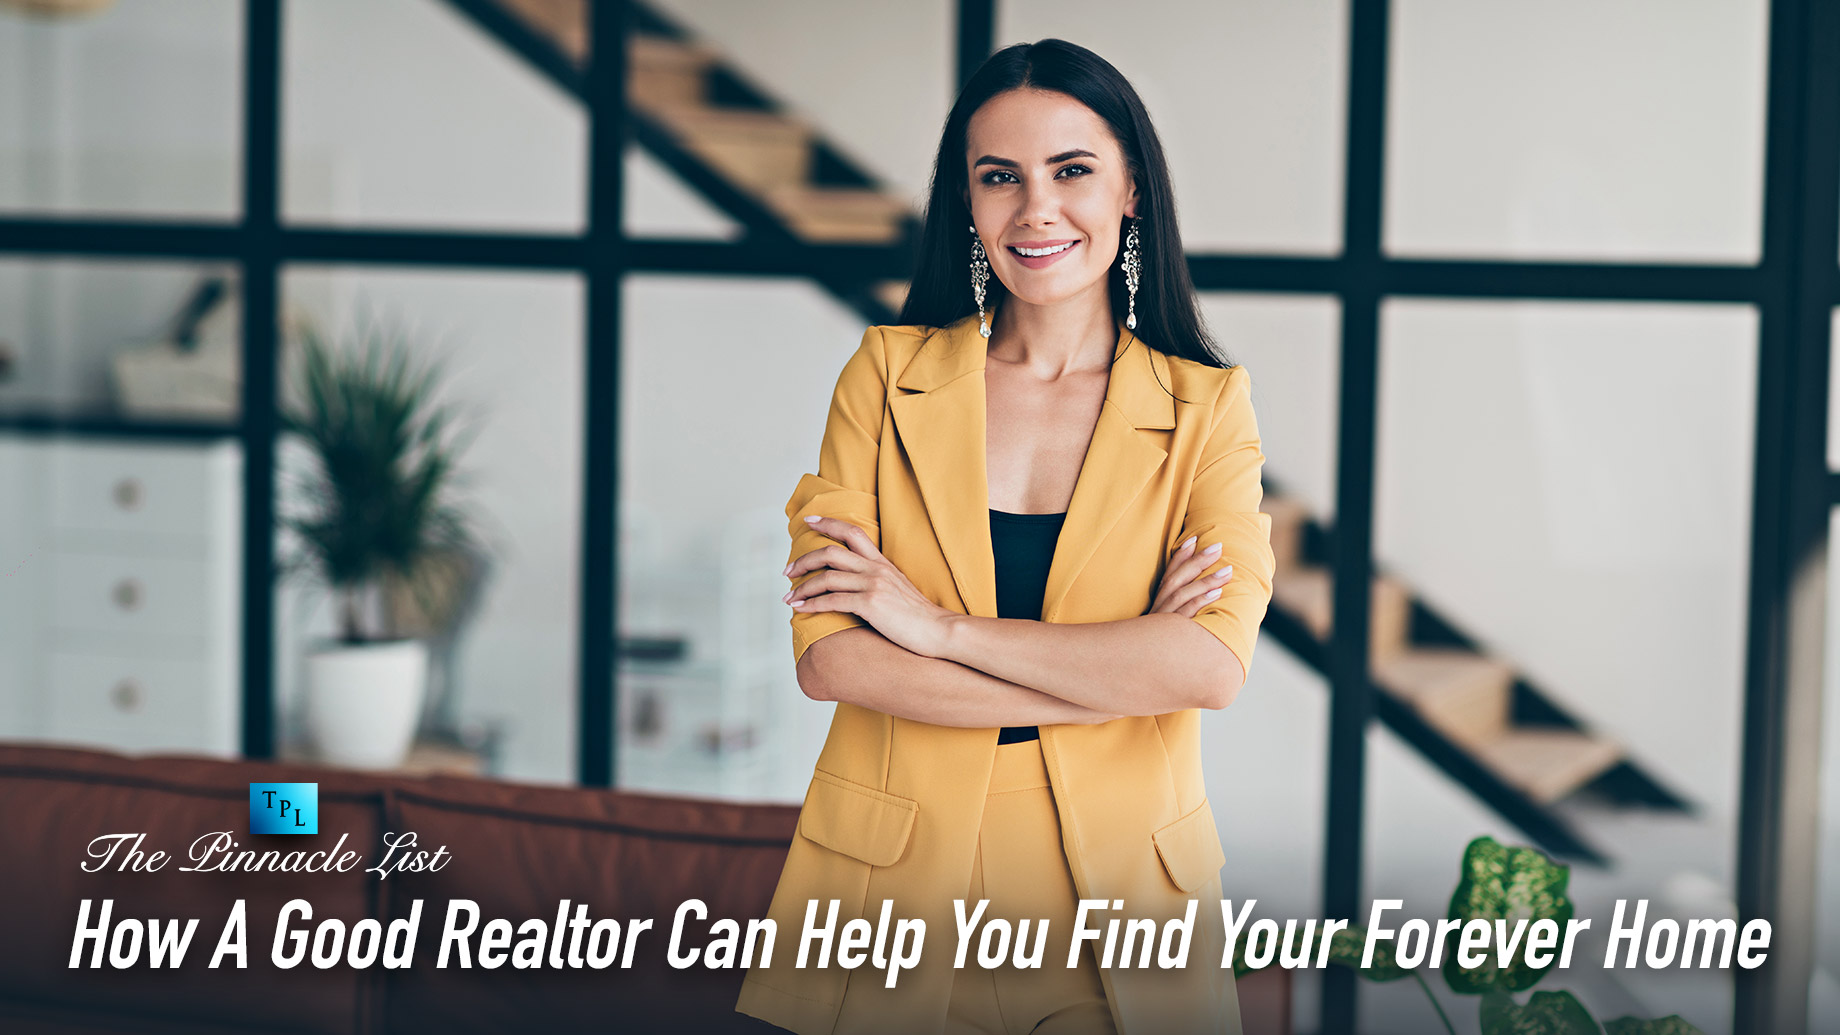 How A Good Realtor Can Help You Find Your Forever Home